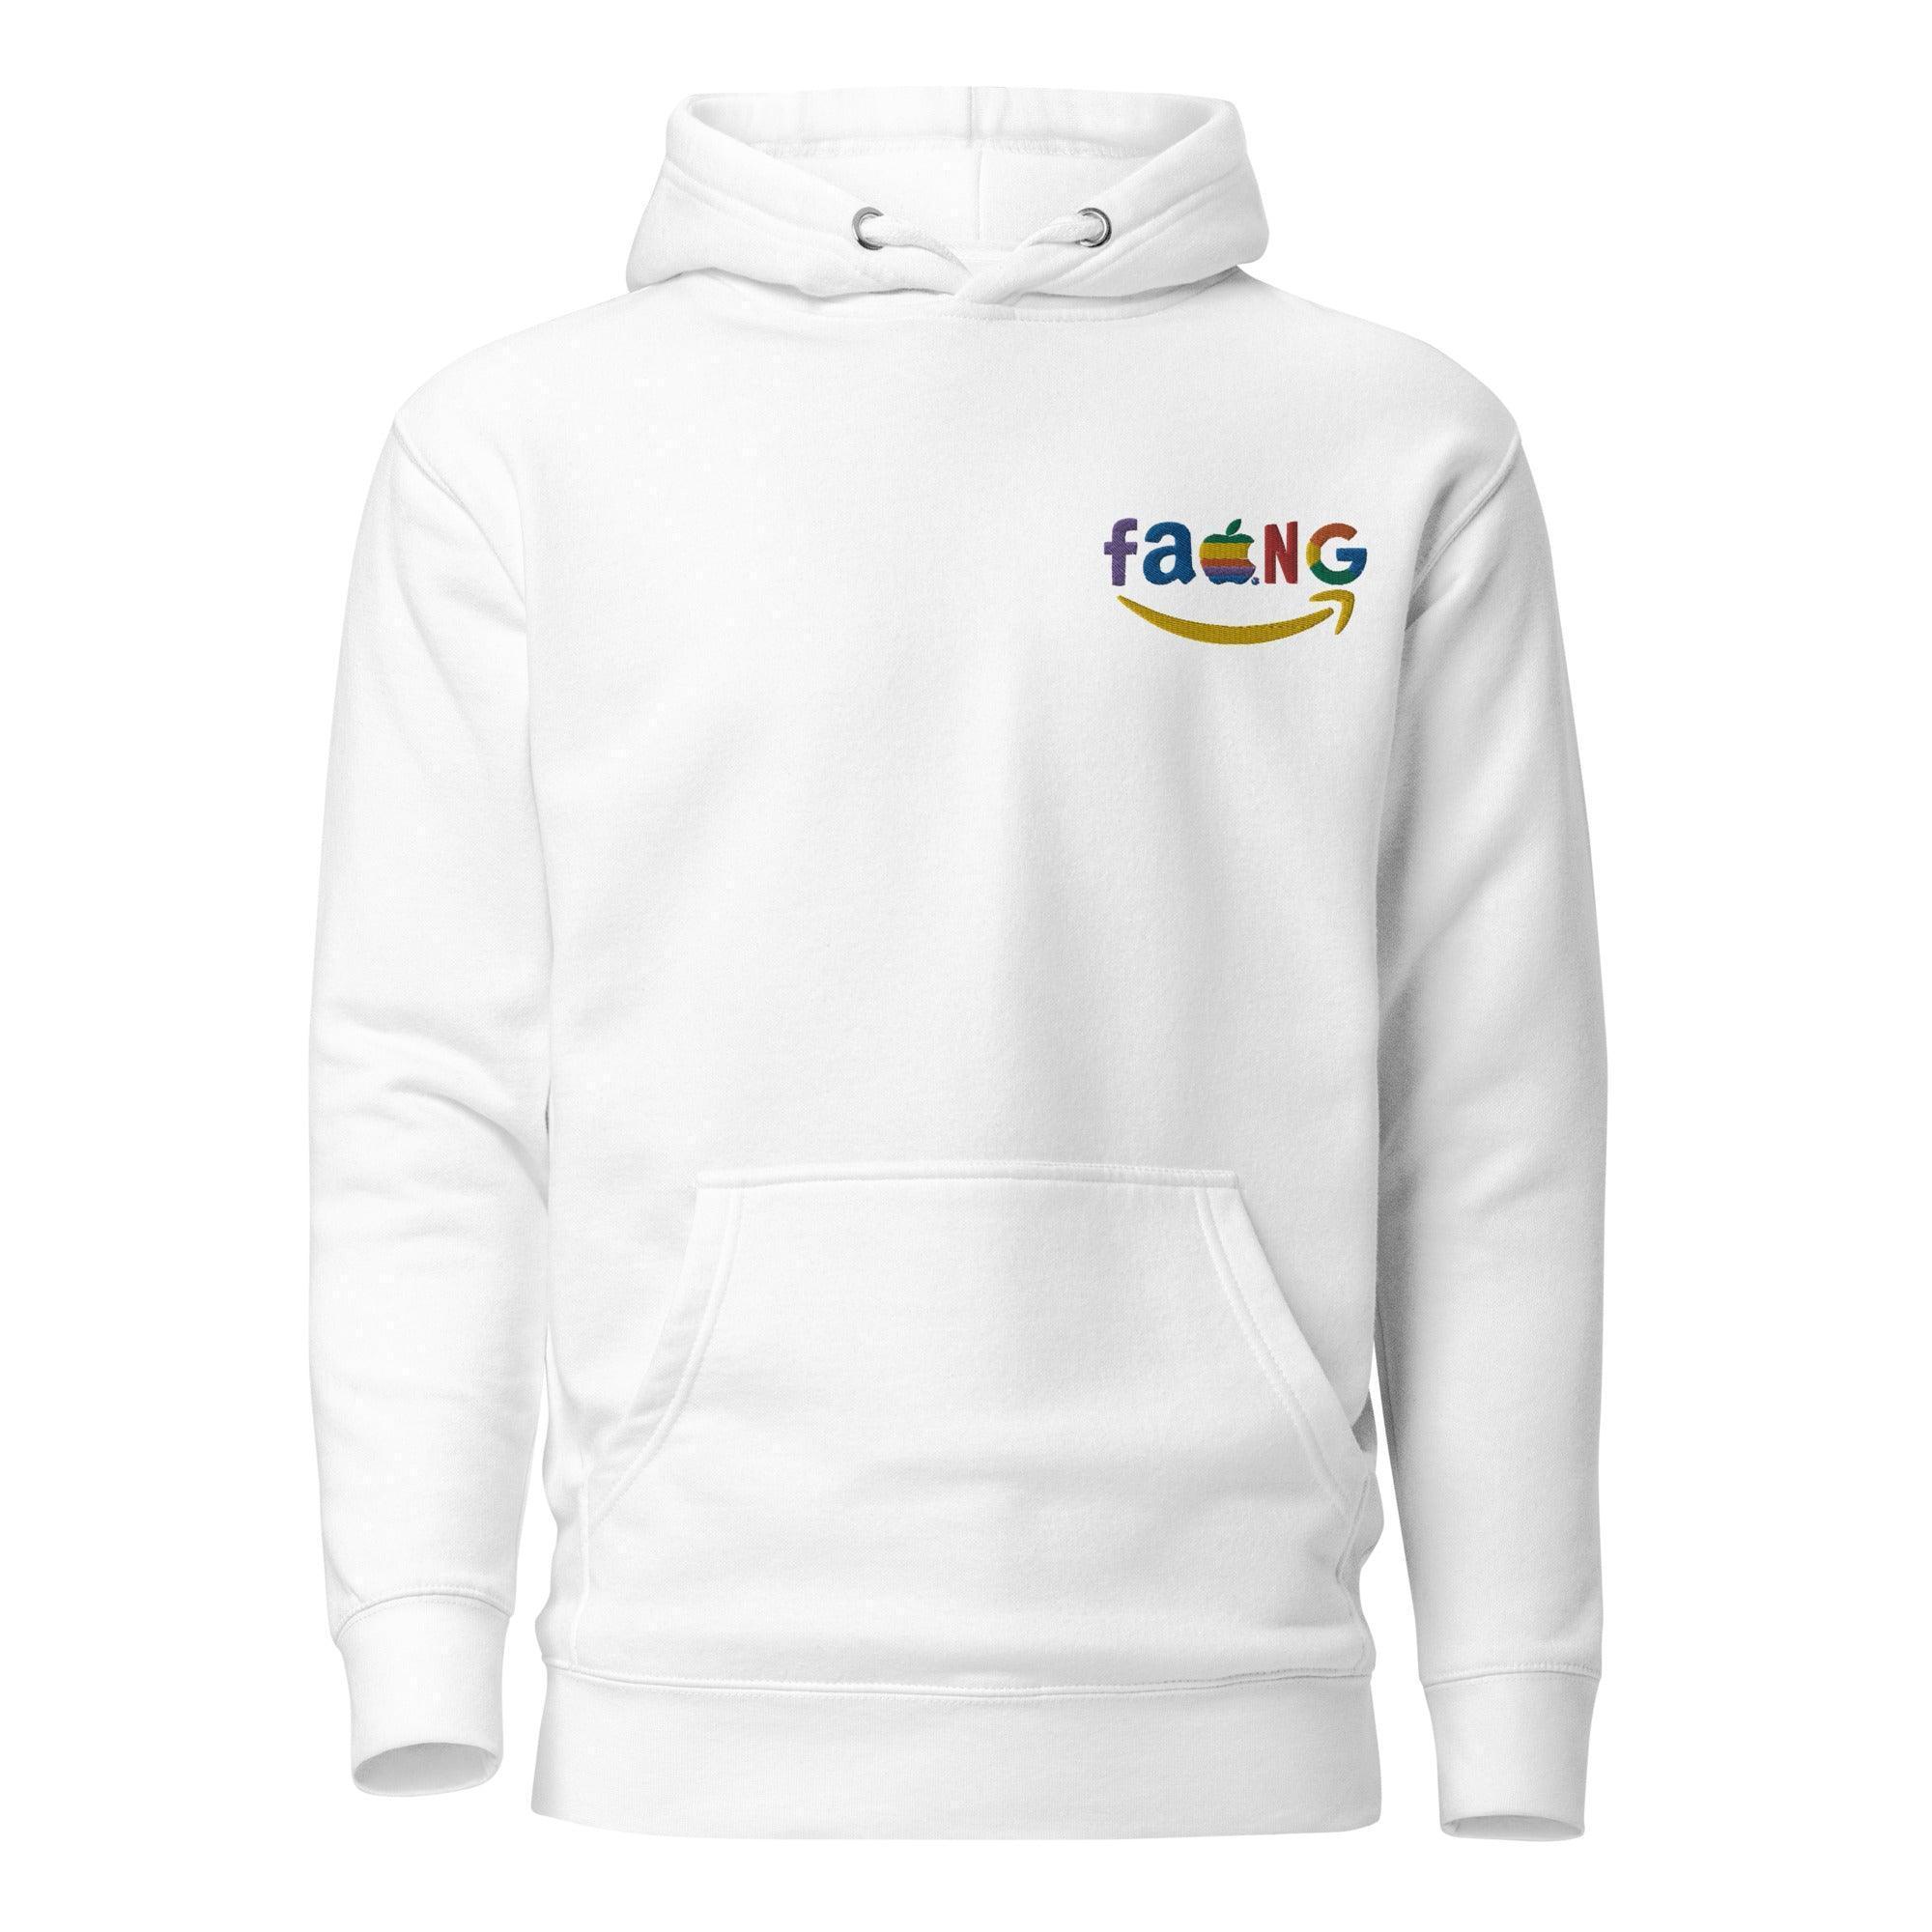 F.A.A.N.G. 2 Sweatsuit - InvestmenTees